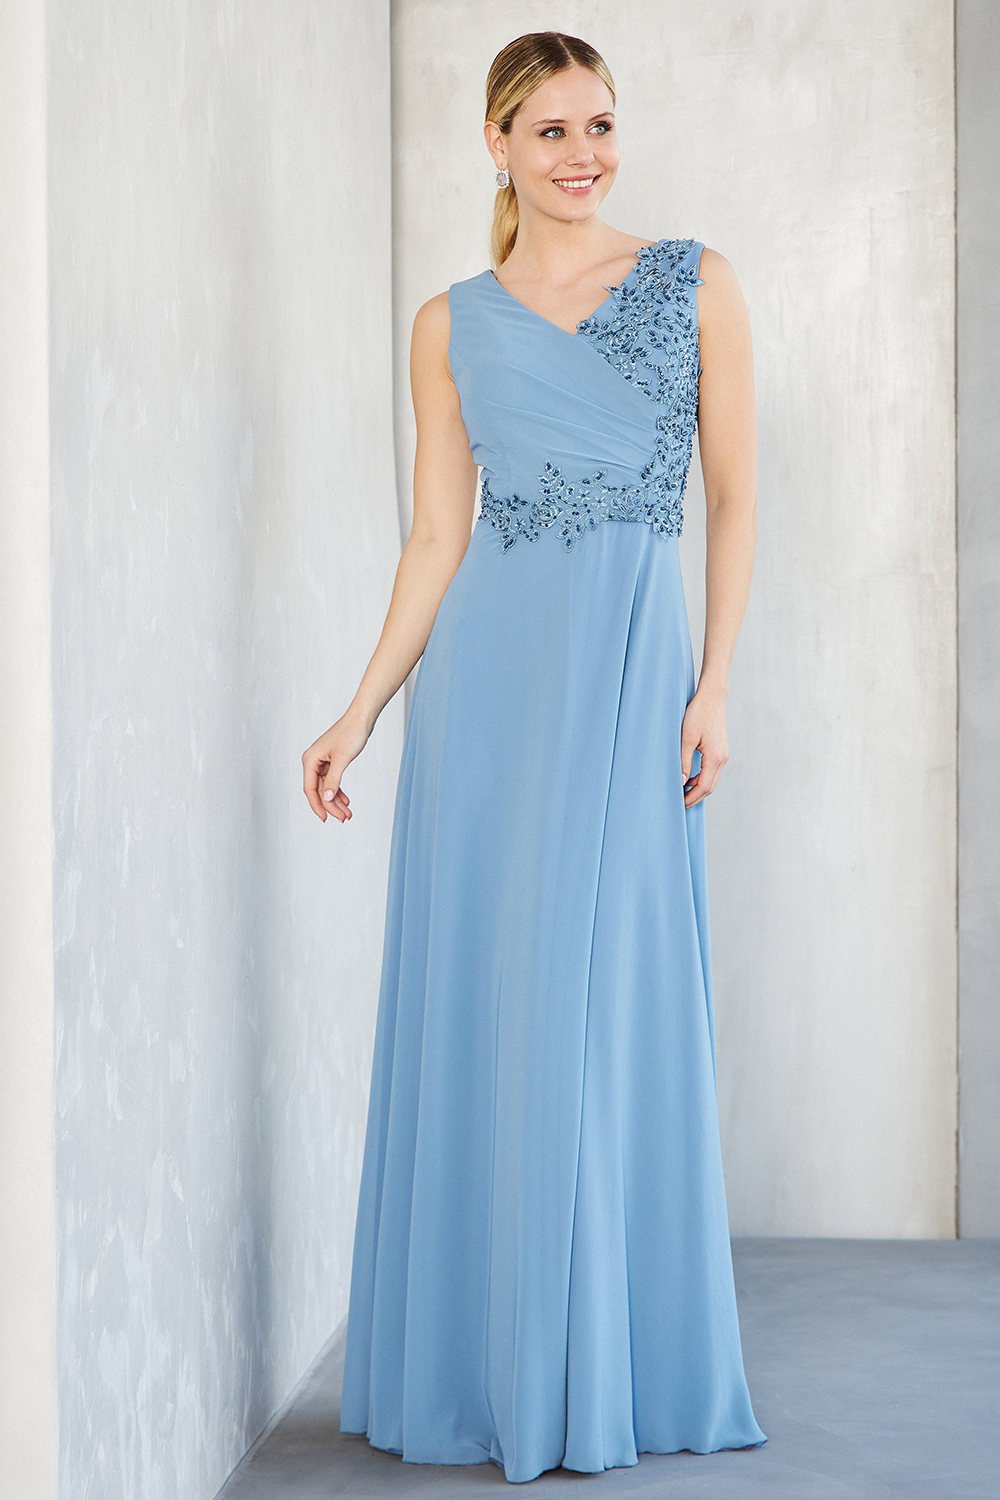 Classic Dresses / Long evening dress with chiffon fabric, lace top with beading and straps